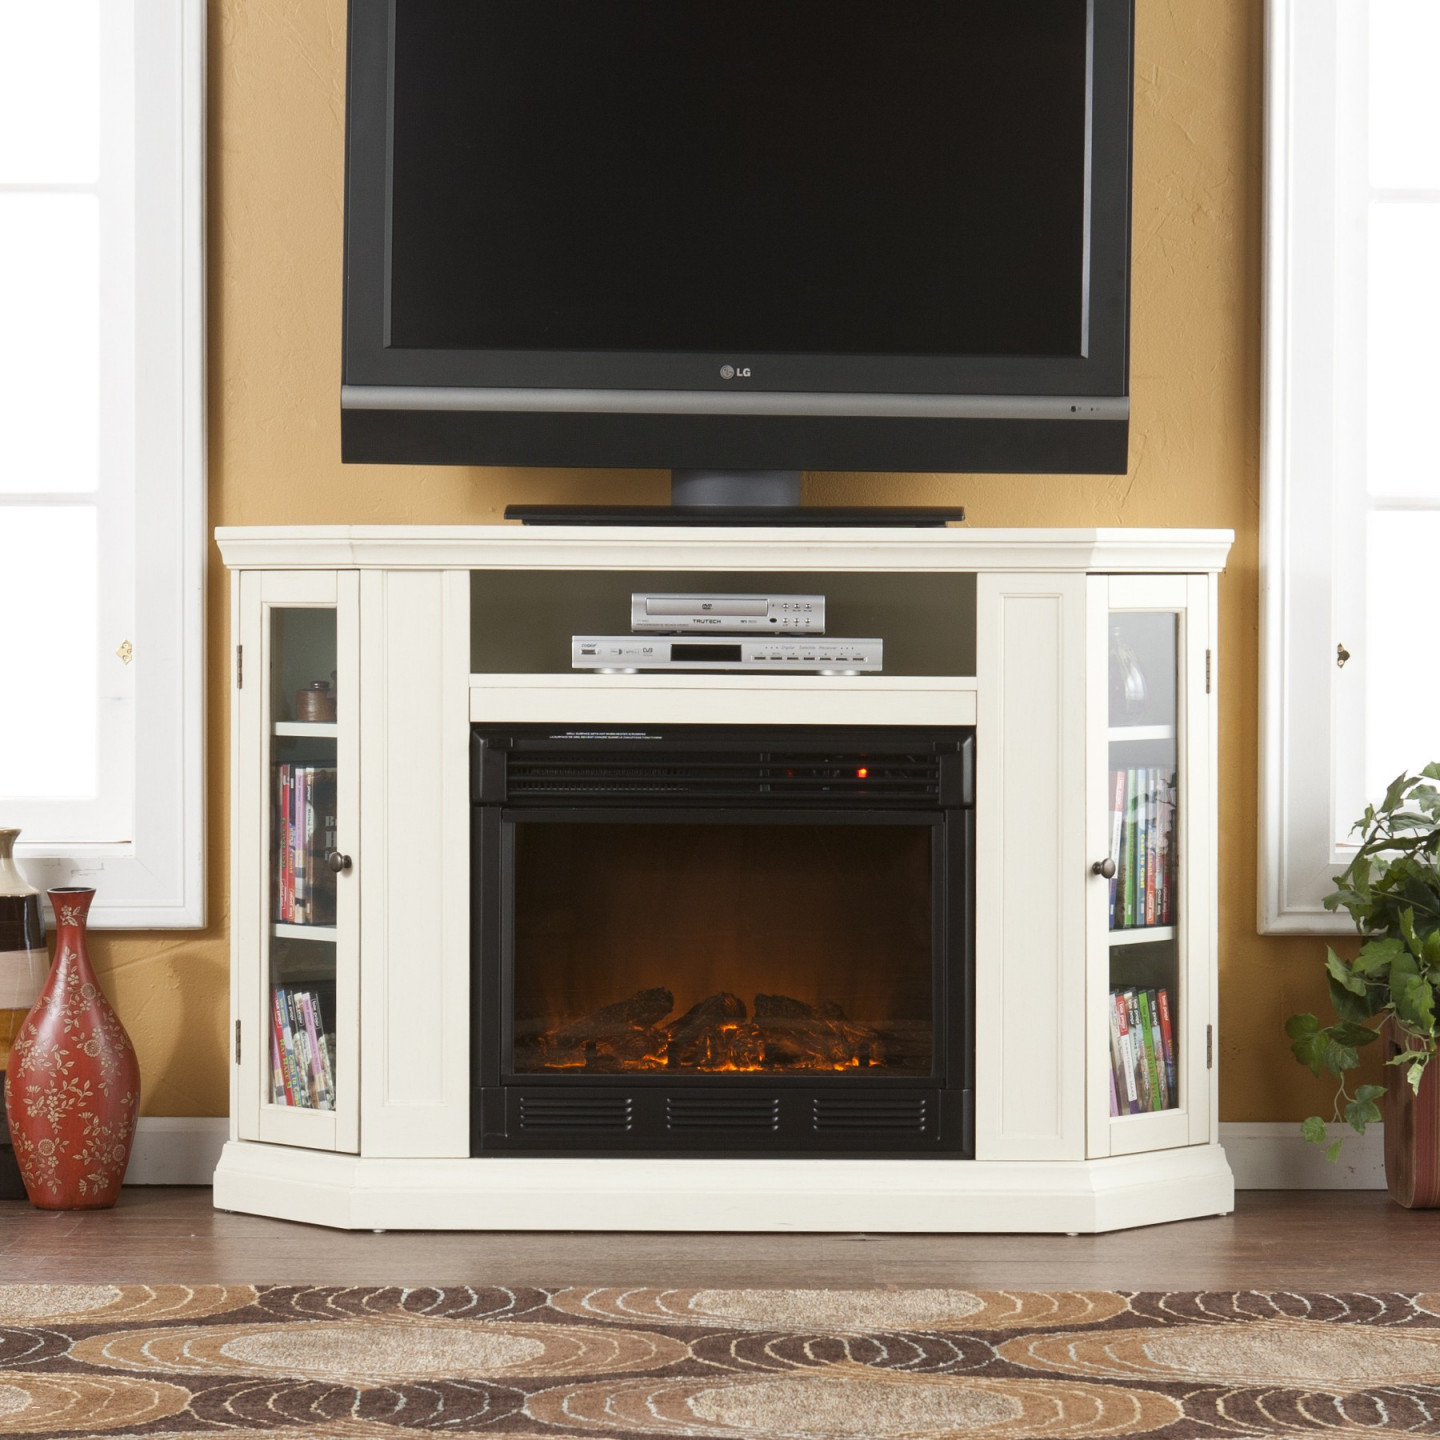 Inexpensive Electric Fireplaces Lovely 35 Minimaliste Electric Fireplace Tv Stand